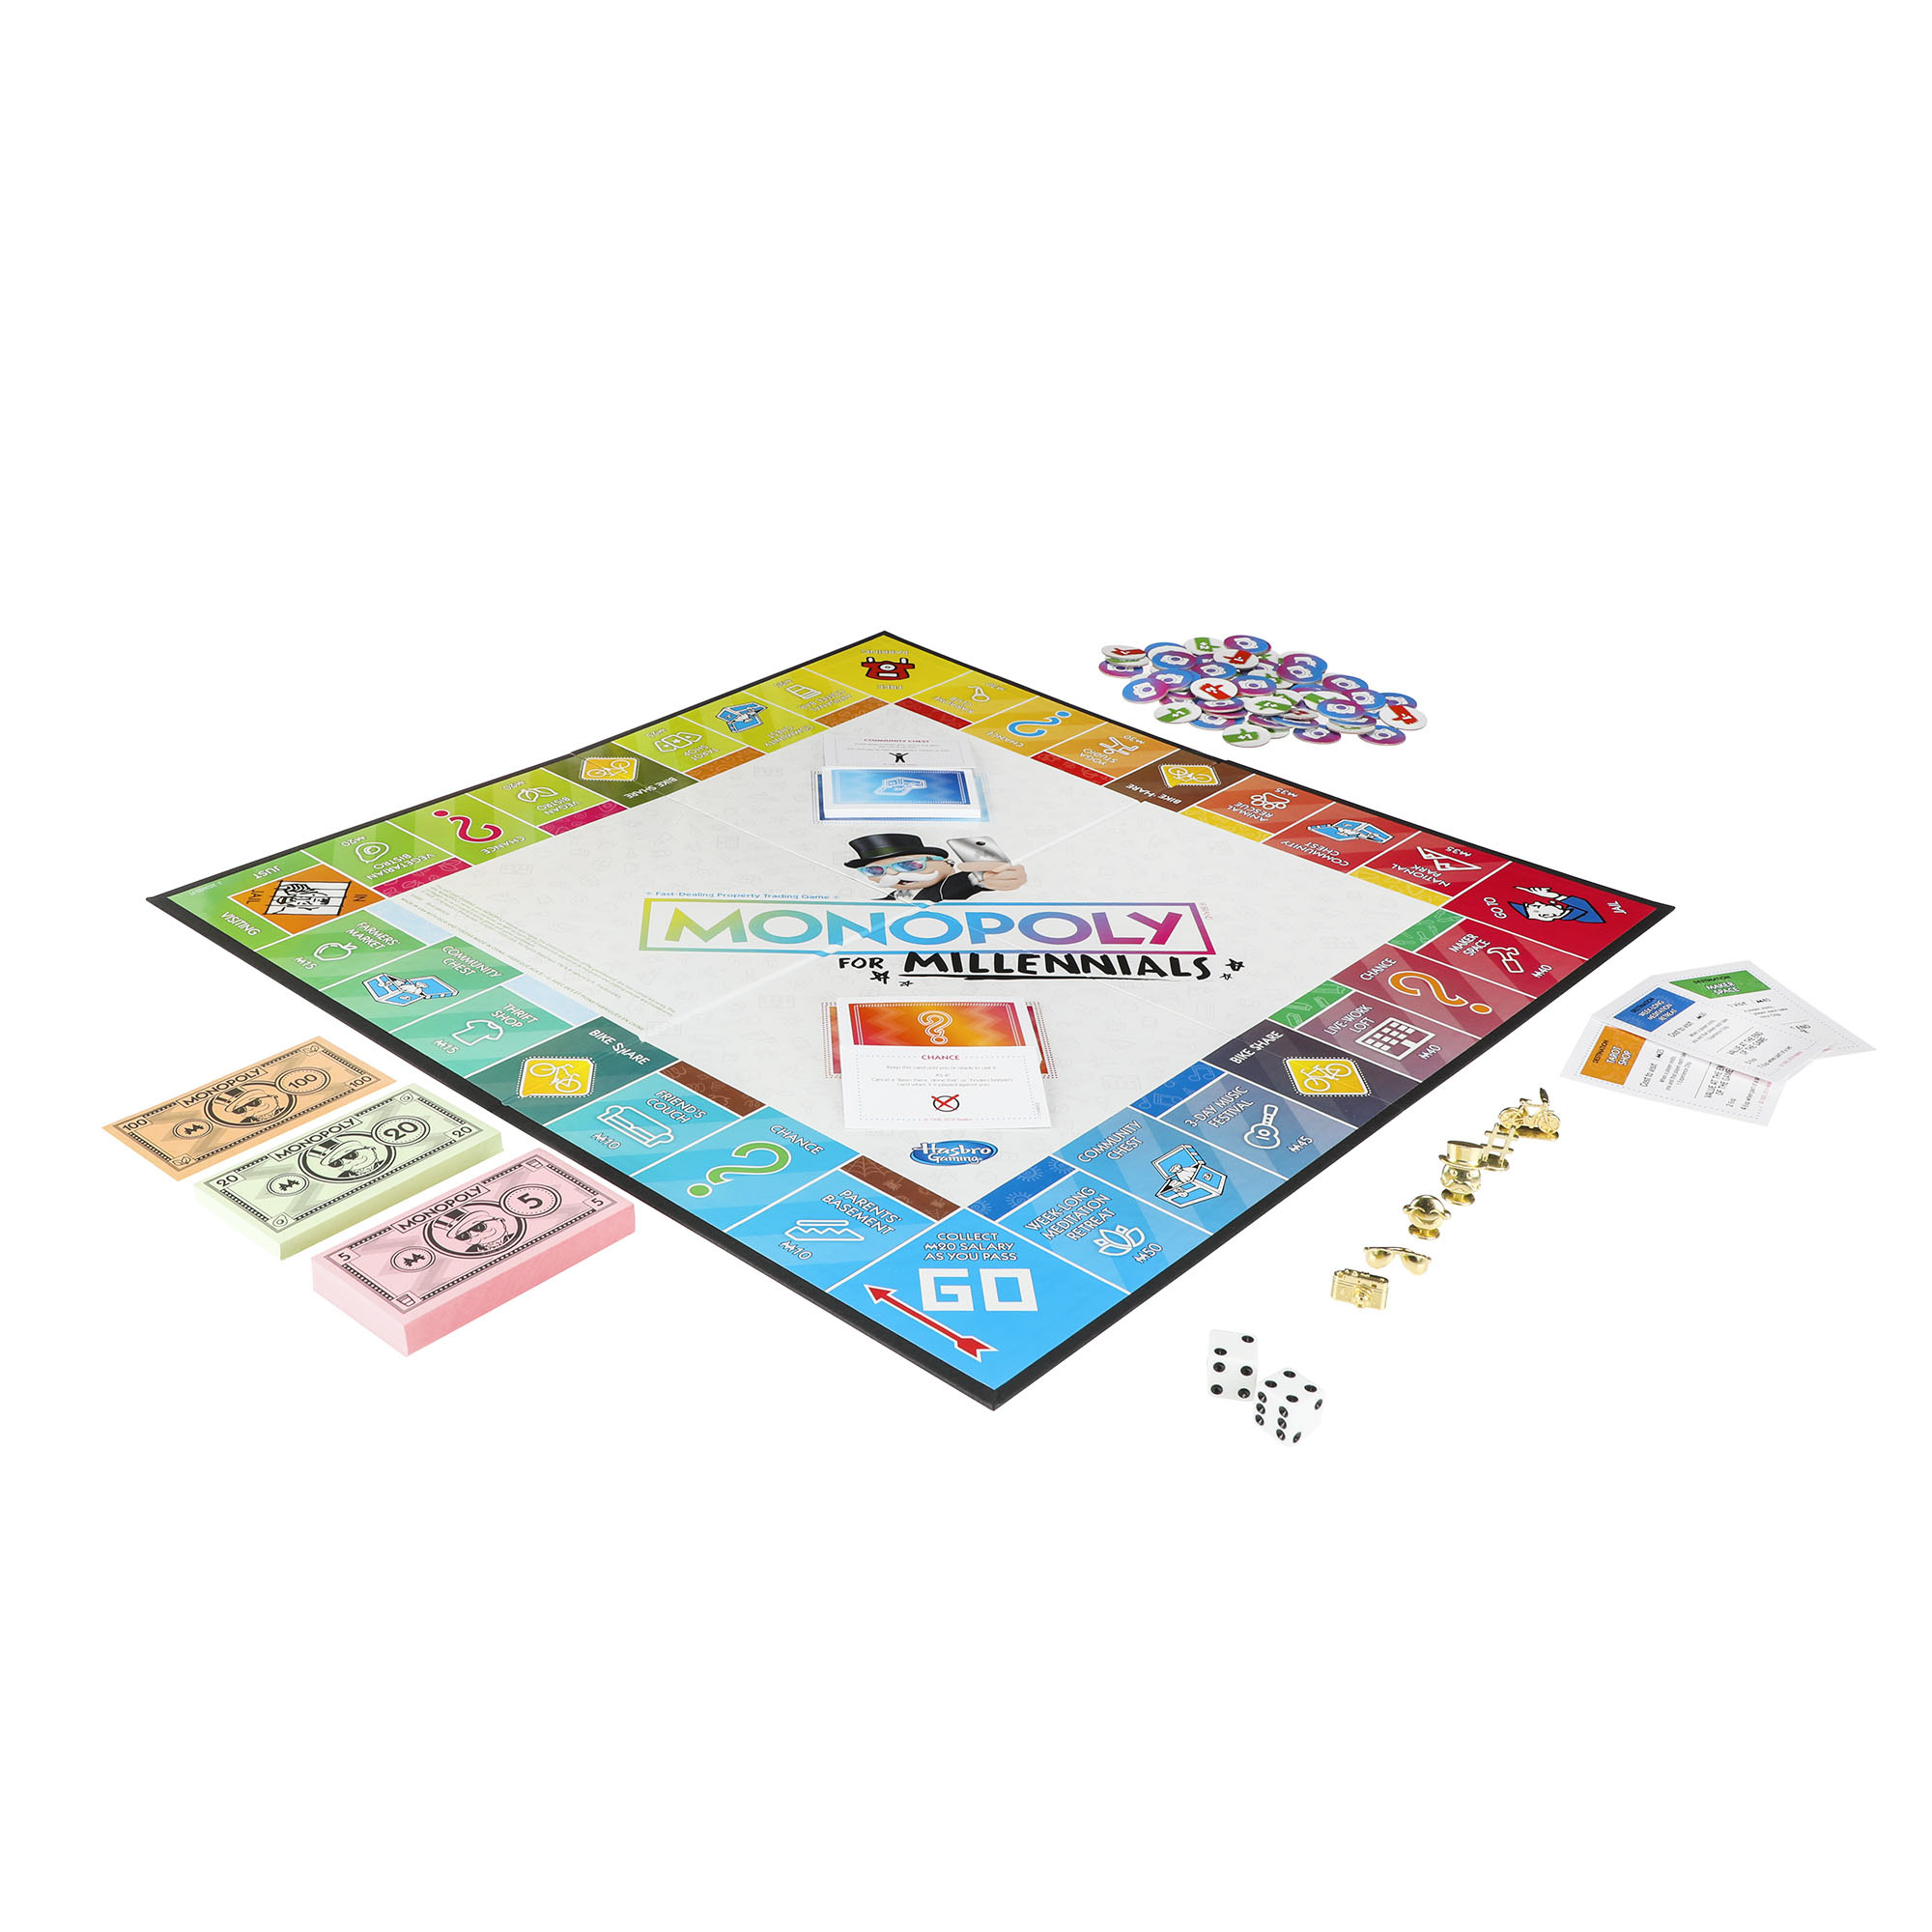 Monopoly for Millennials Board Game for Kids and Family Ages 8 and Up, 2-4 Players - image 3 of 5